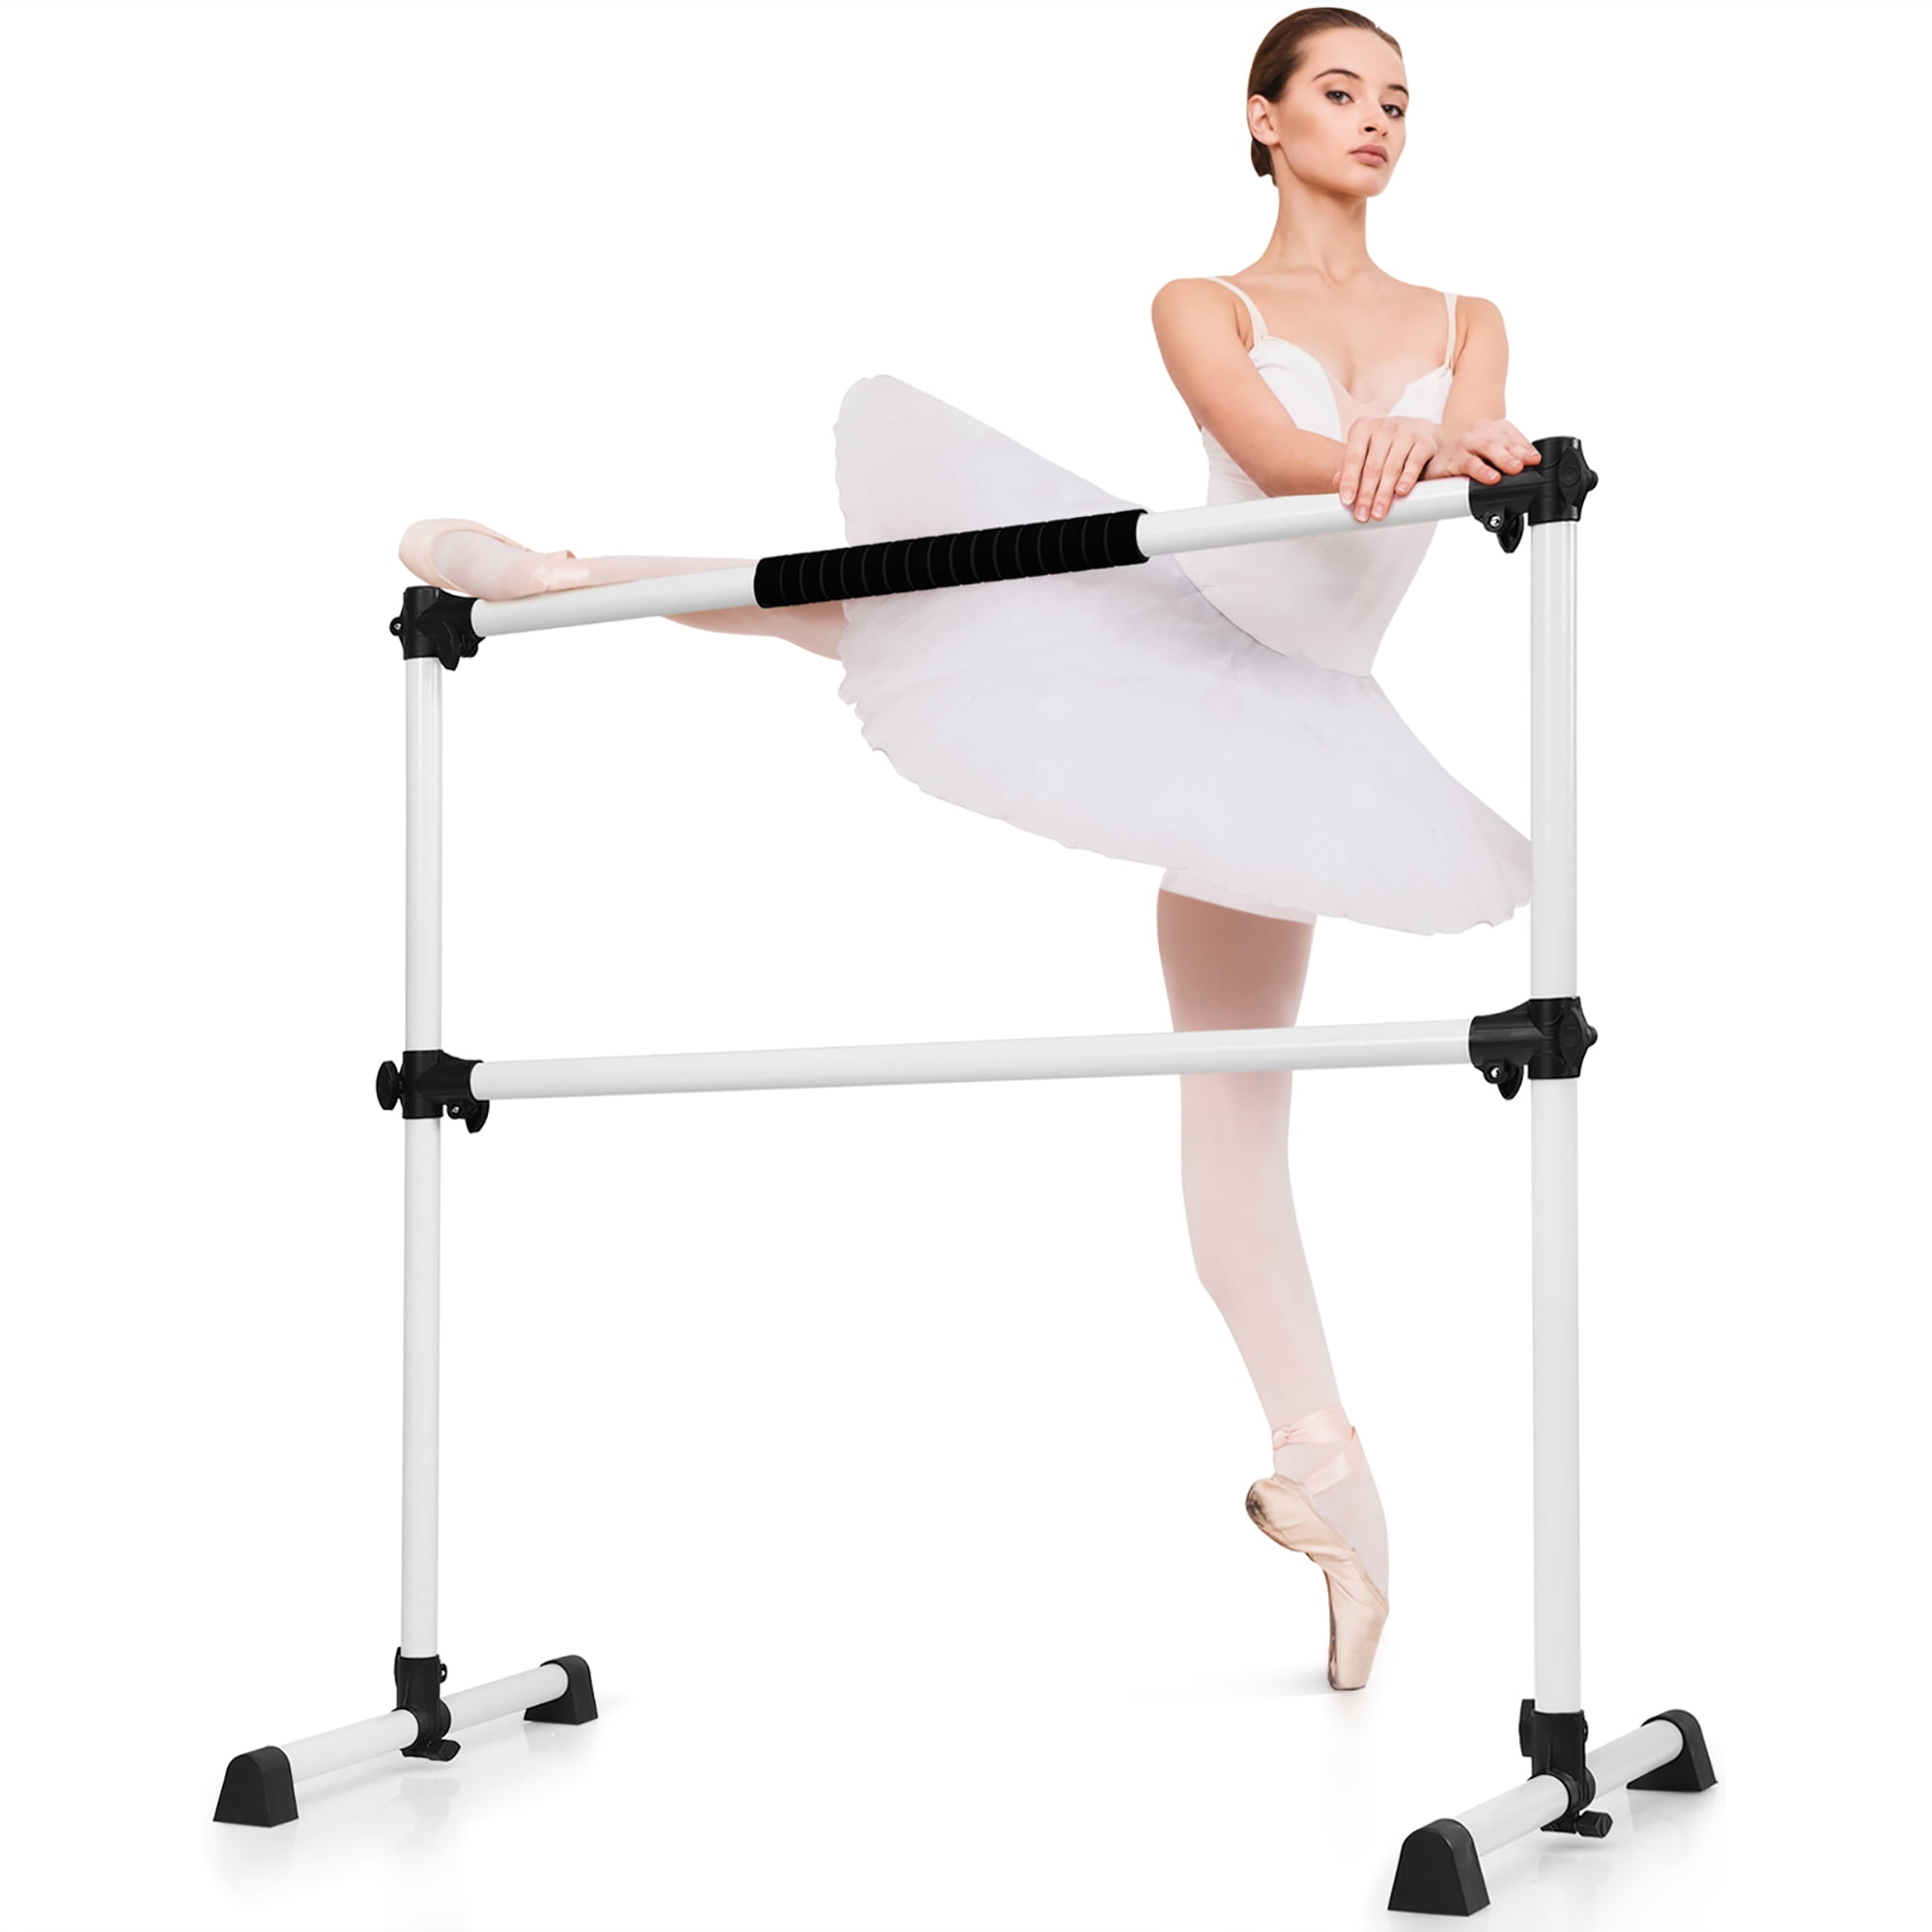 Shining Sticker Included PreGymnastic Updated 4 Ft Adjustable & Portable Double Freestanding Ballet Barre with Carry Bag for Dancing Stretching